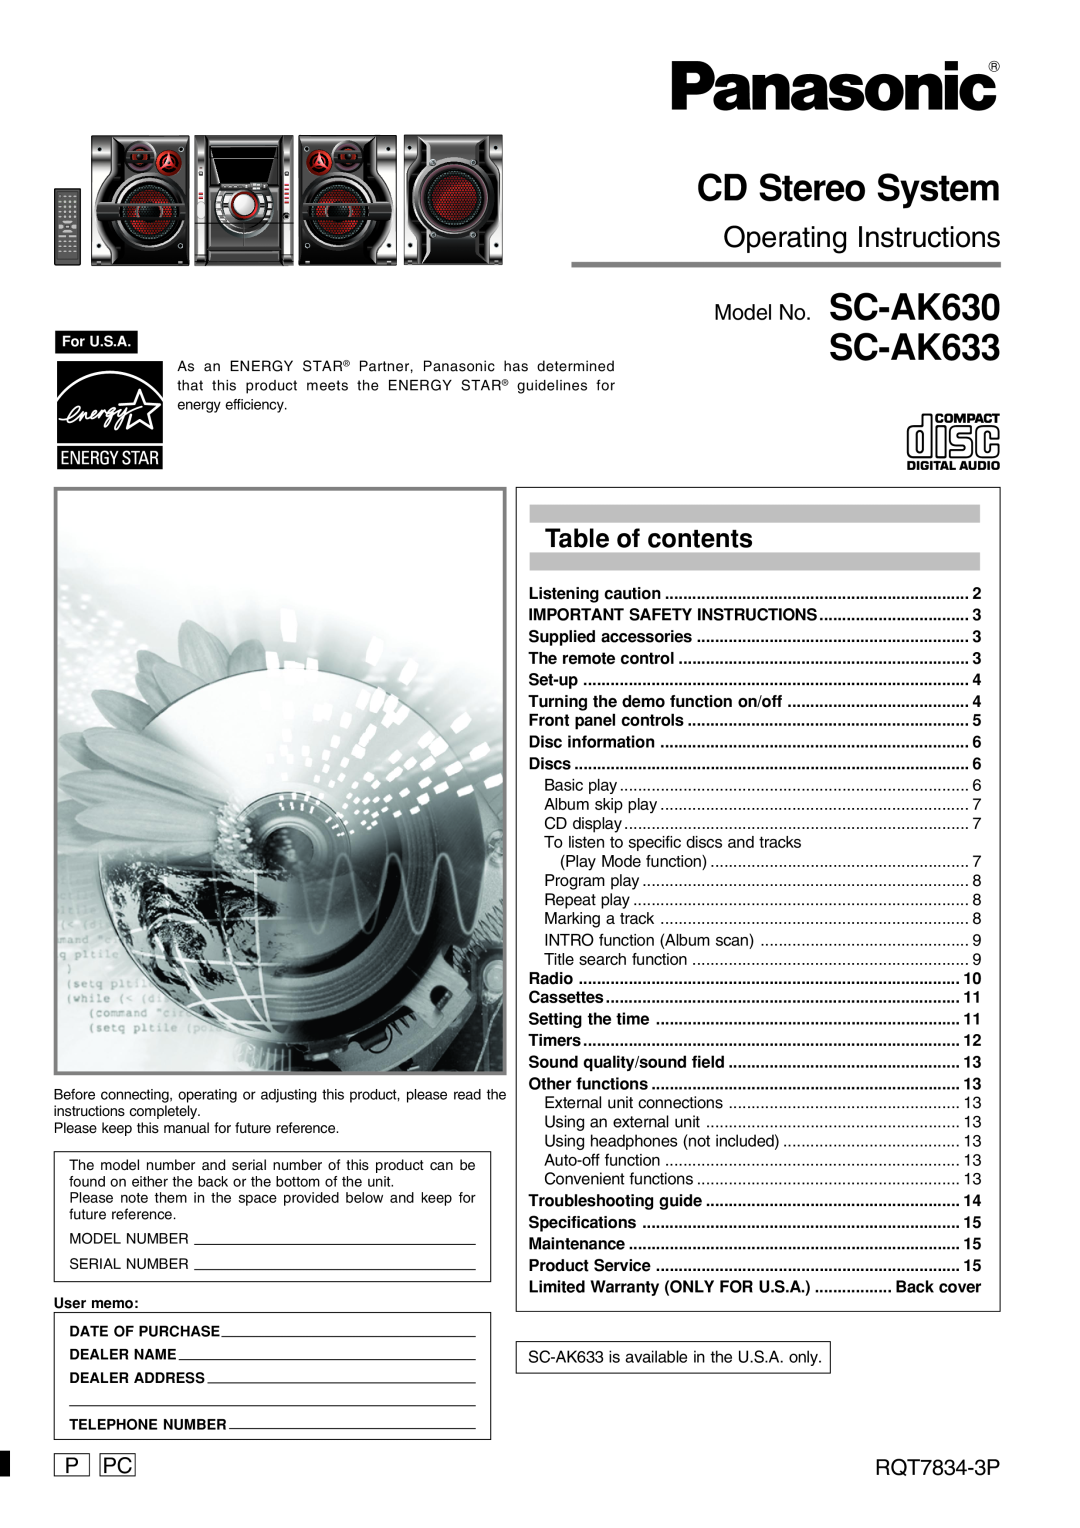 Panasonic RQT7834-3P important safety instructions Table of contents, Model No. SC-AK630, P Pc, CD Stereo System, SC-AK633 